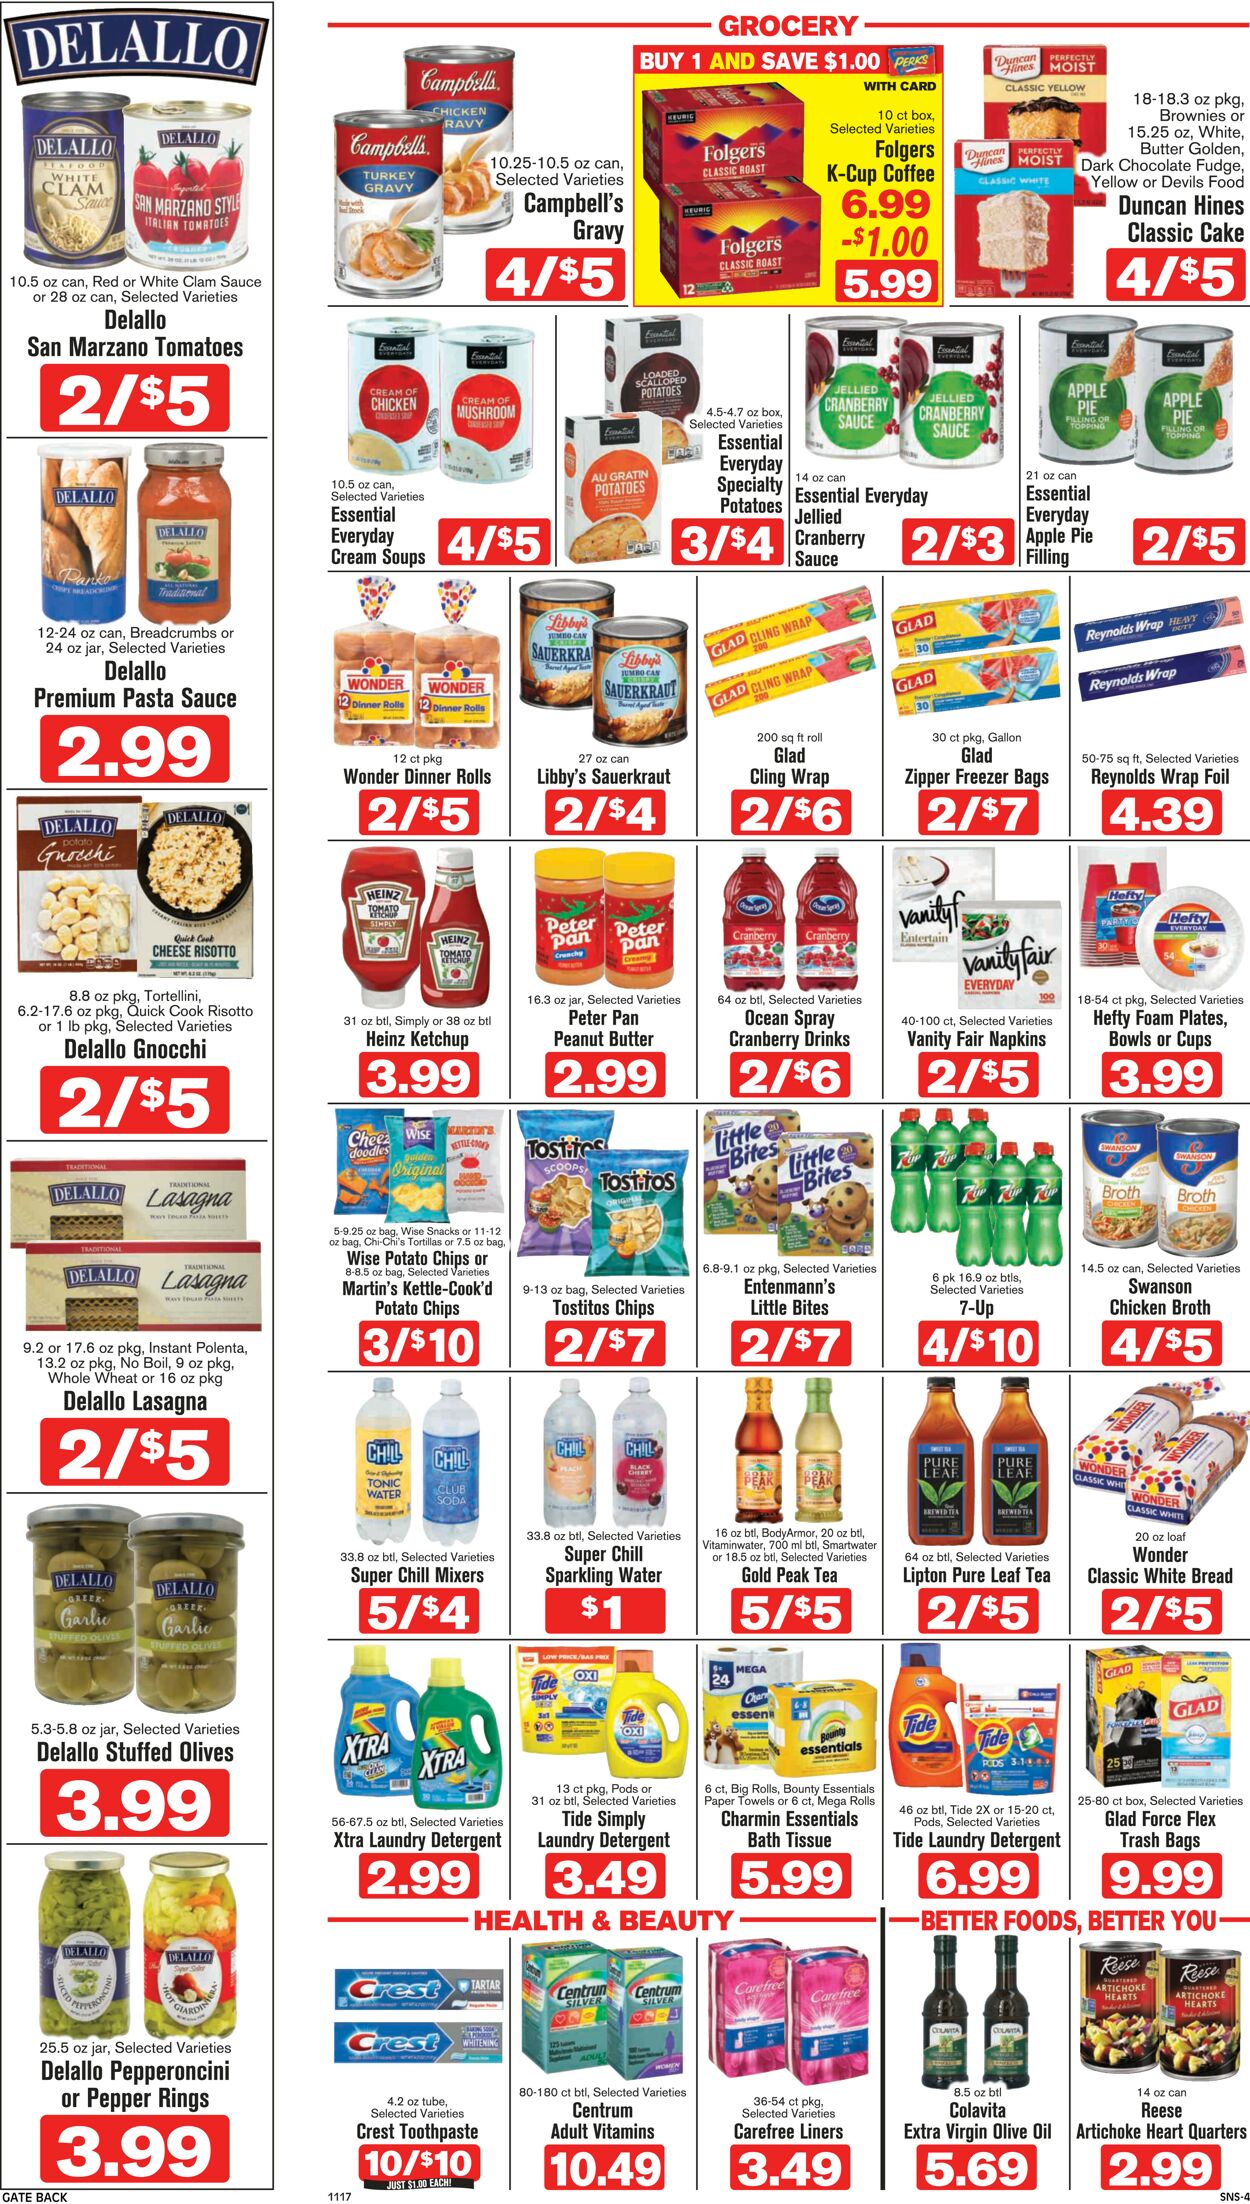 Shop ‘n Save (Pittsburgh) Ad from 11/17/2022